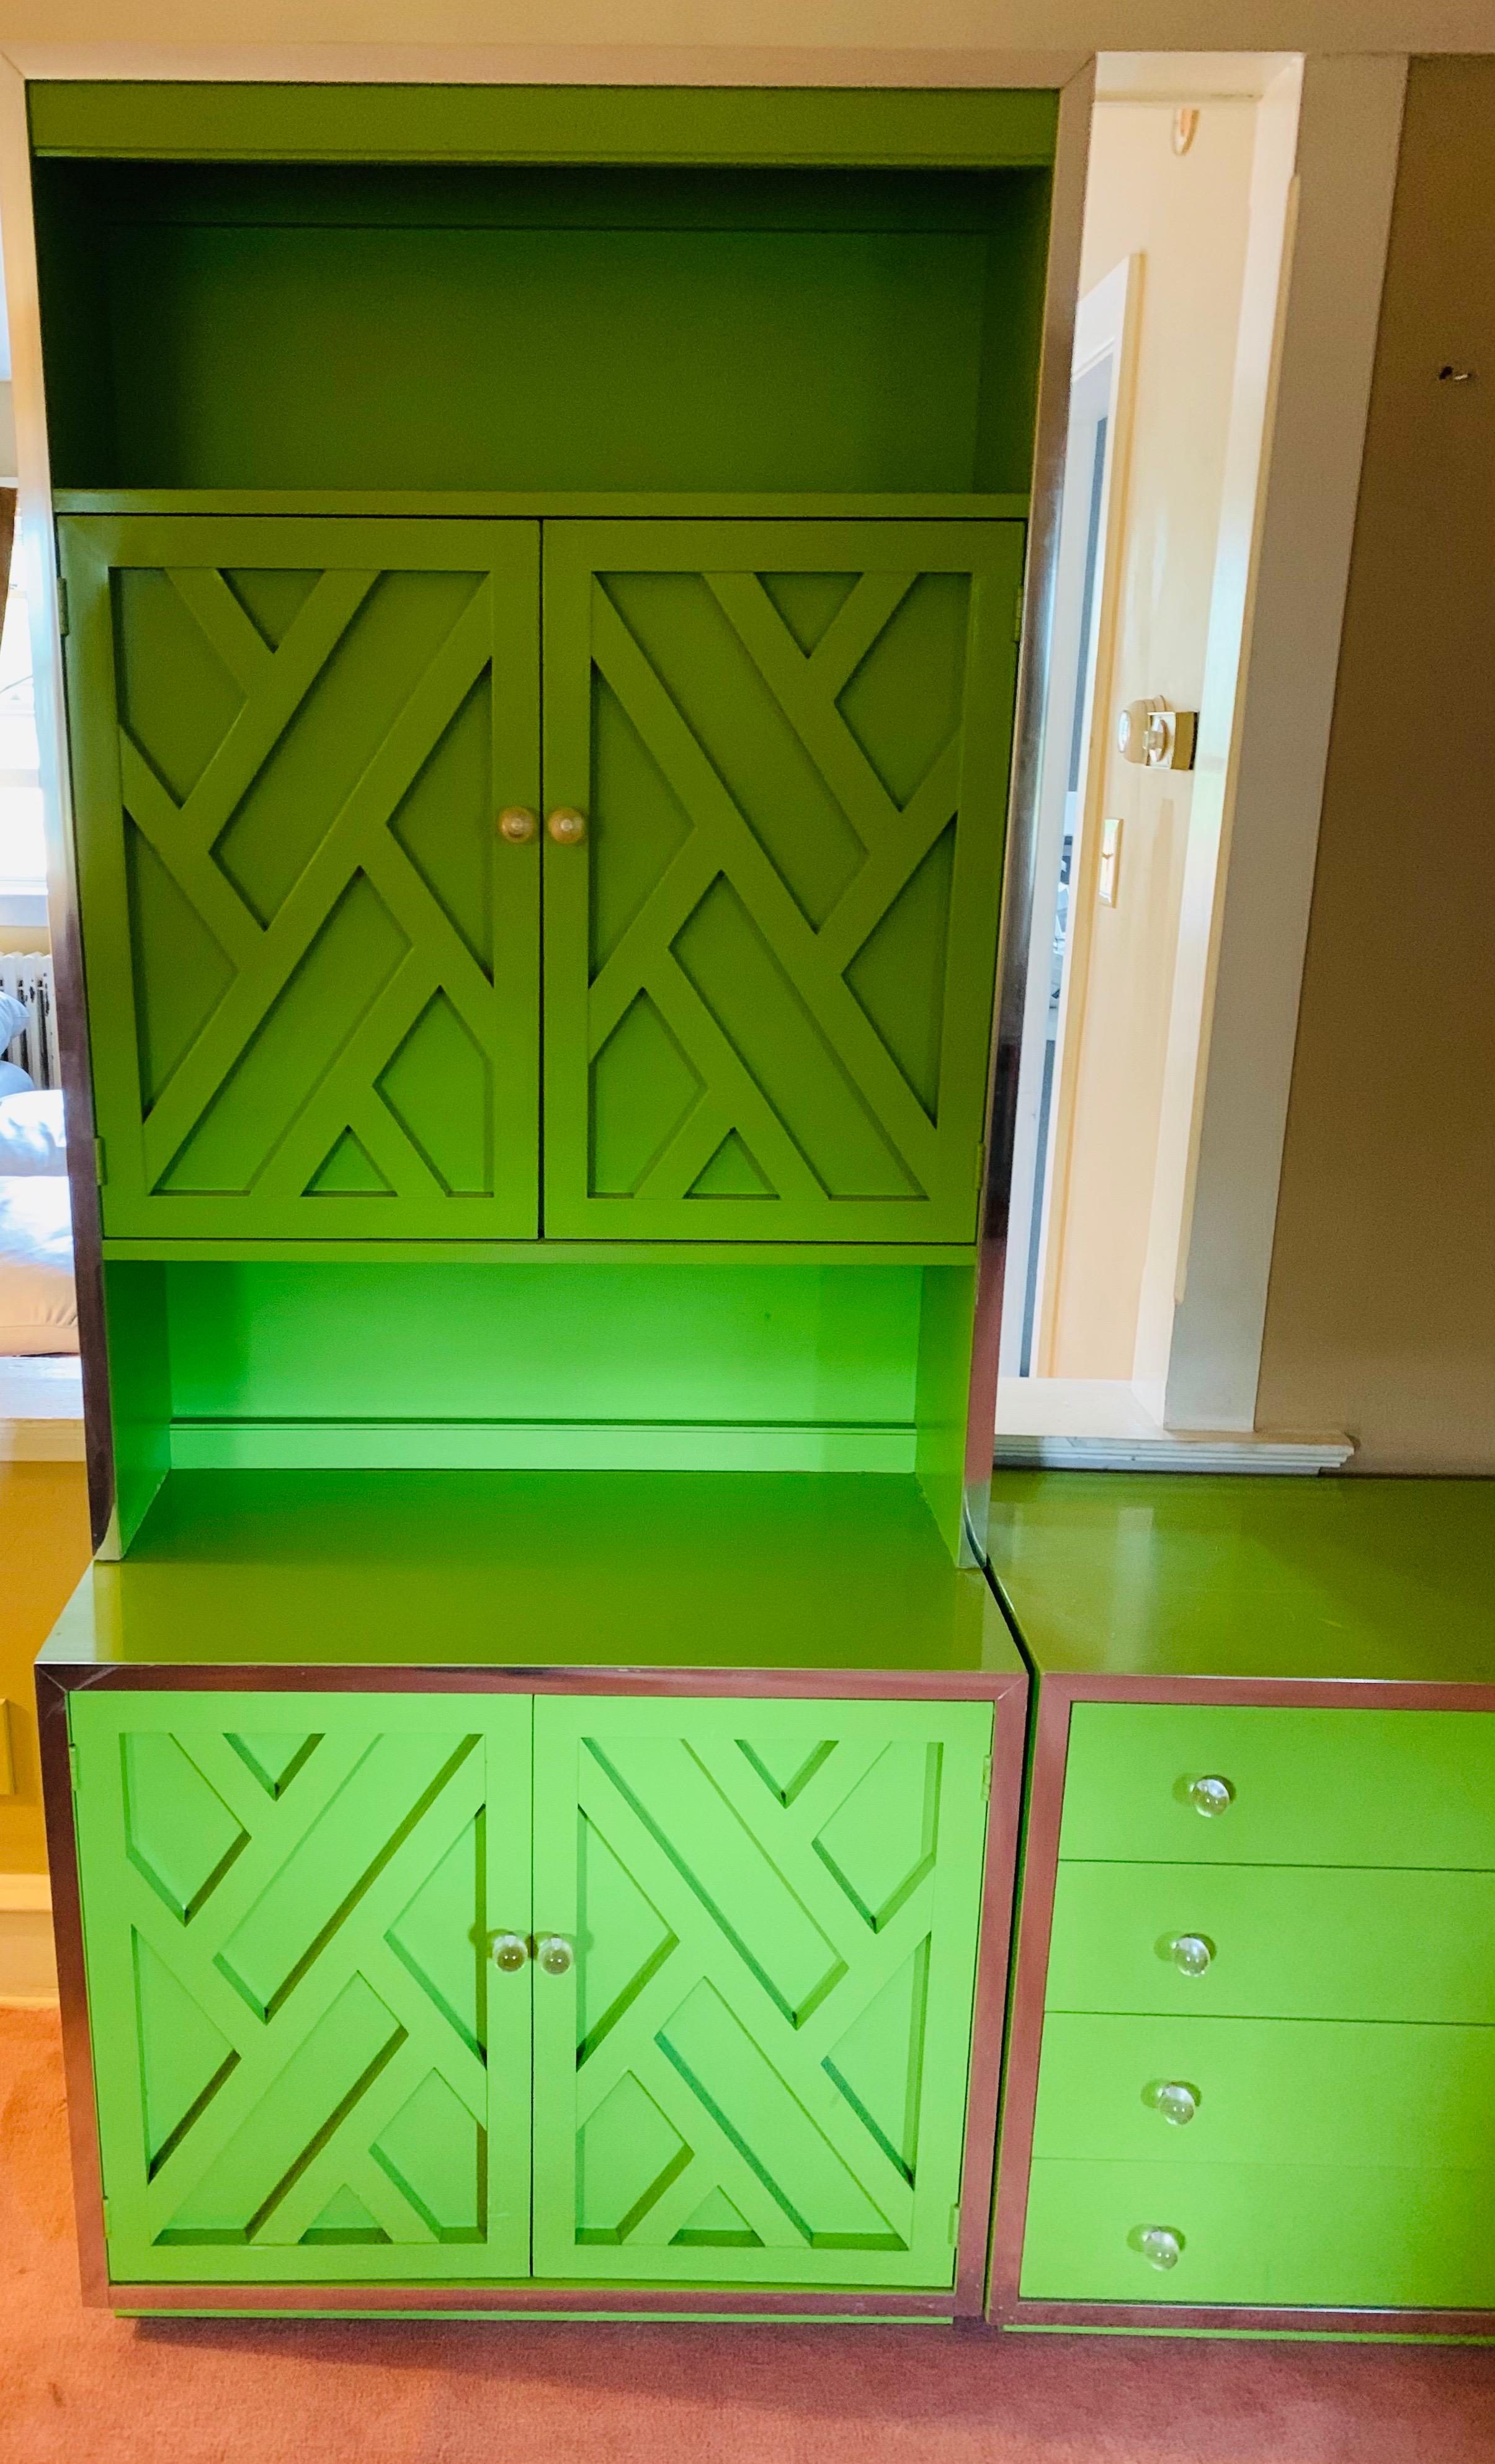 Green Lacquered Wall Unit by Henredon Furniture, 1970's, American 1